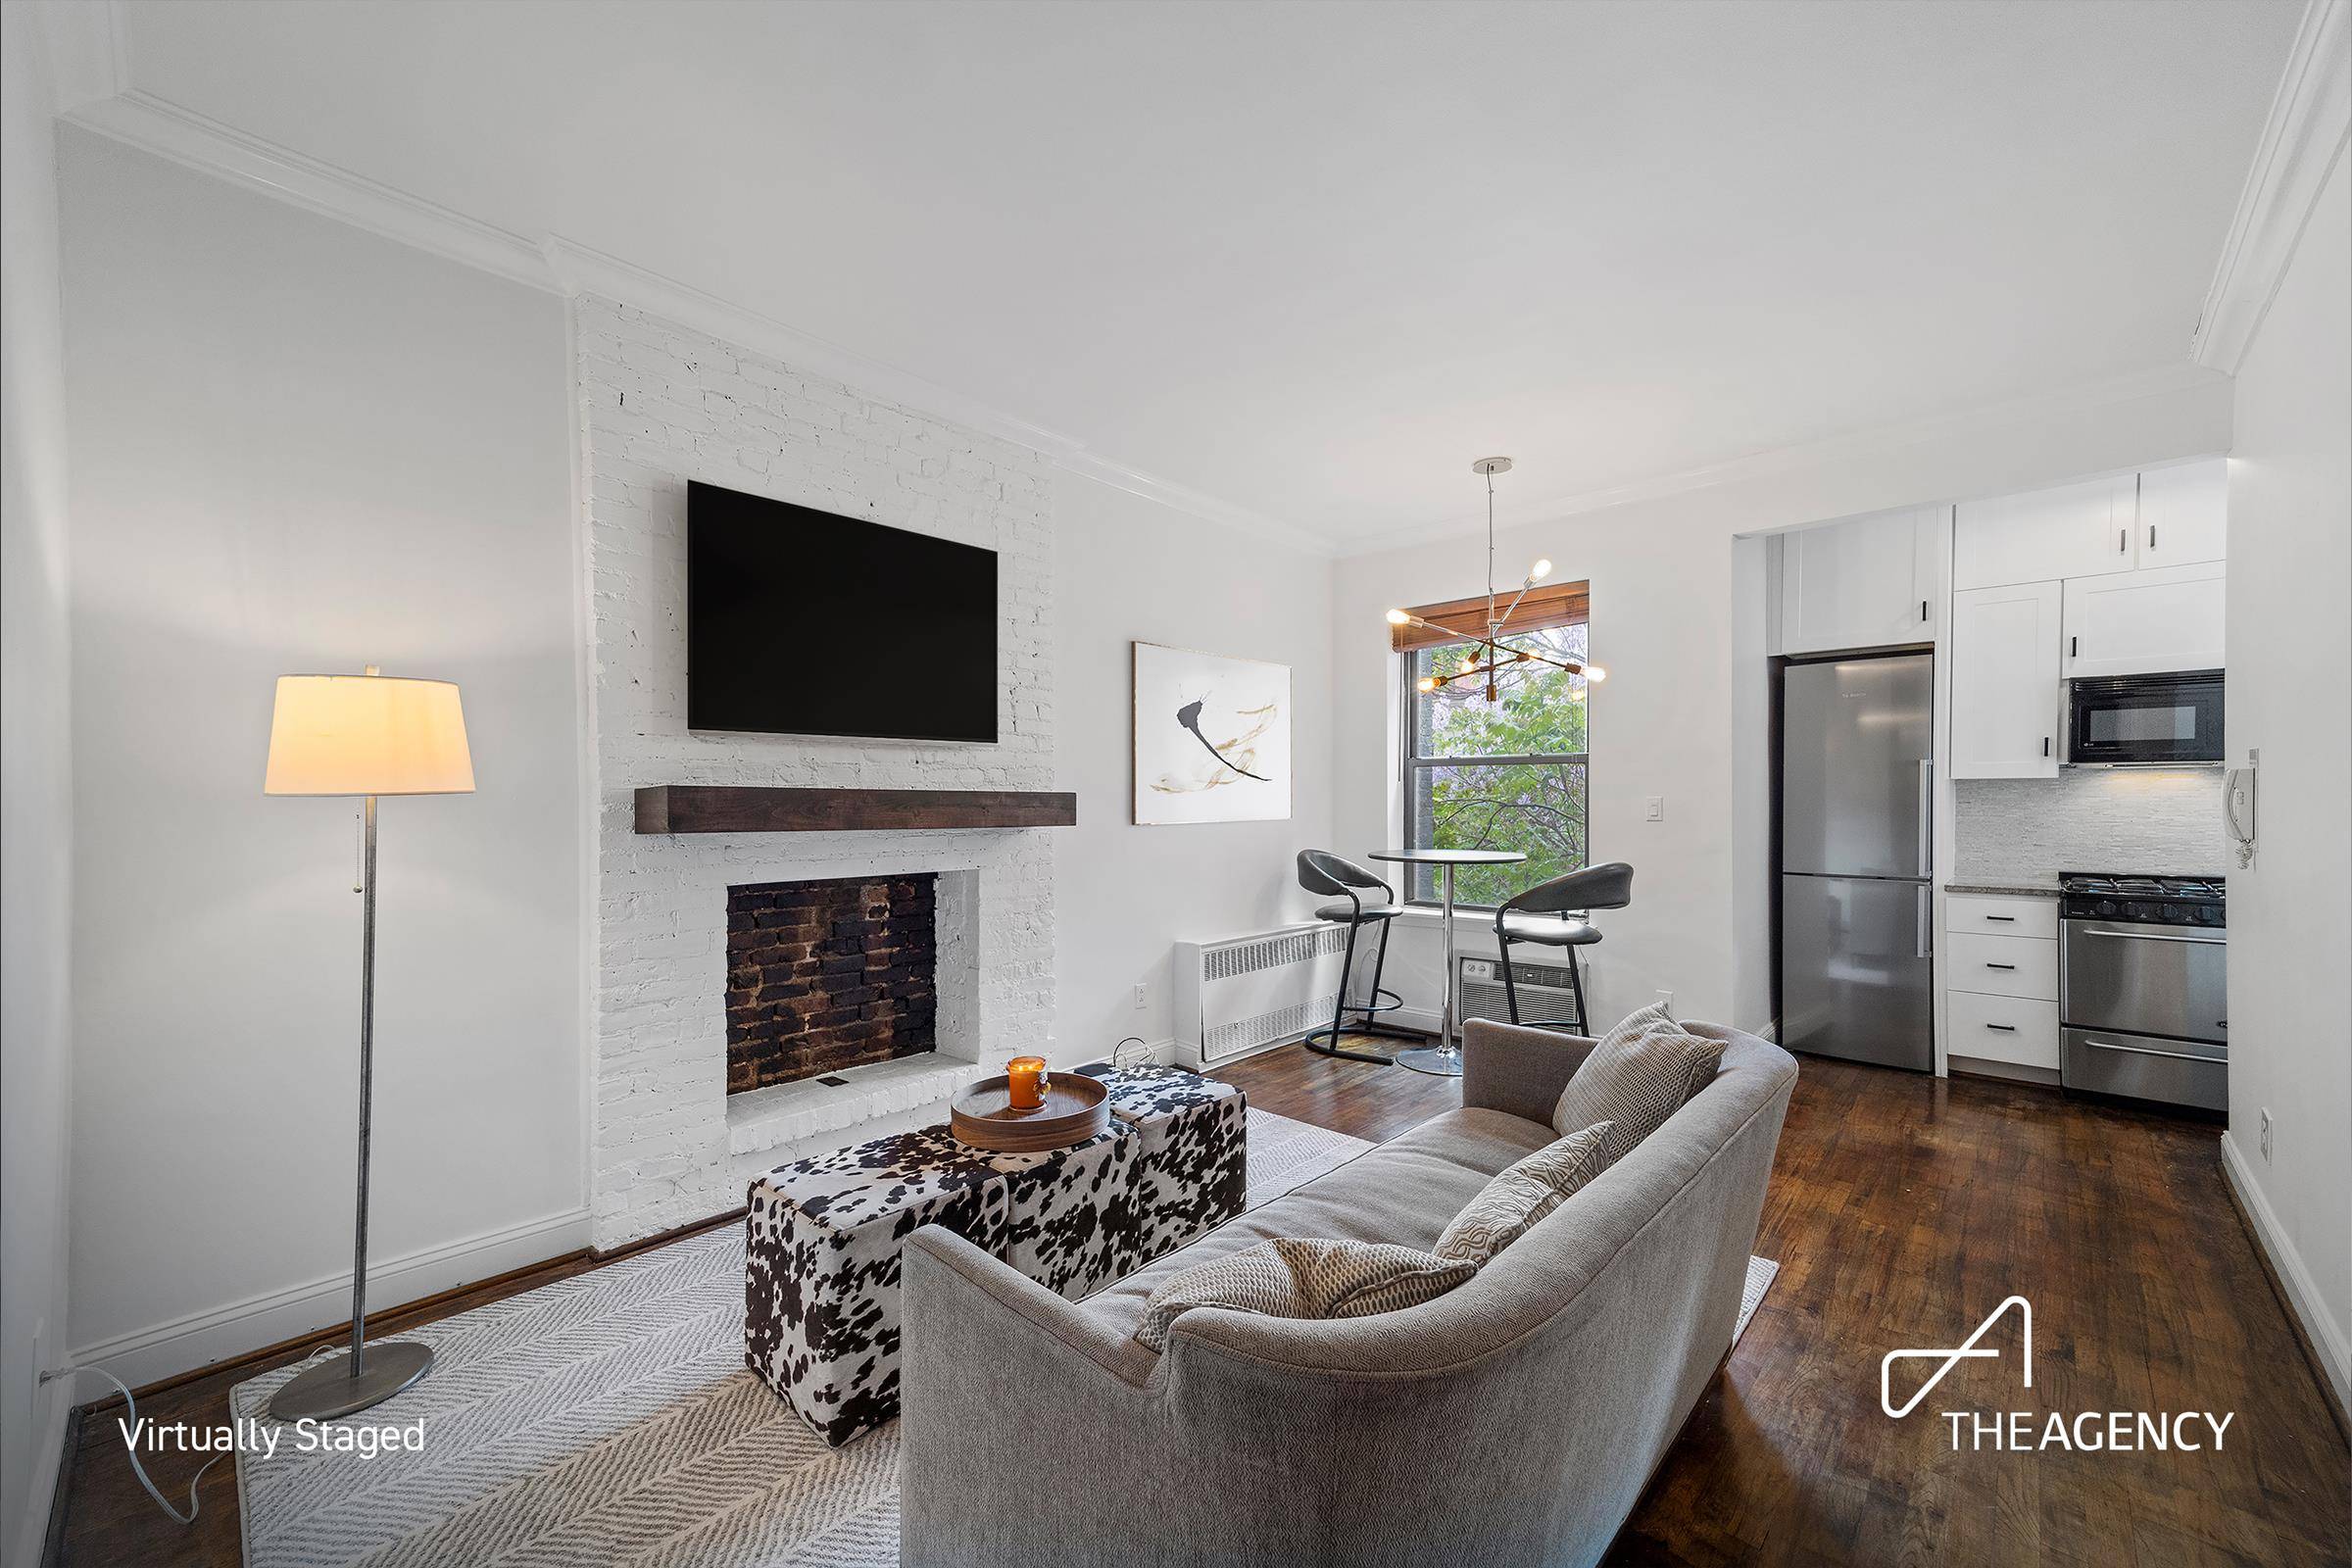 Welcome home to a charming 2 bedroom 1 bath located on a scenic tree lined street, in the heart of Yorkville and down the block from Rupert Park.